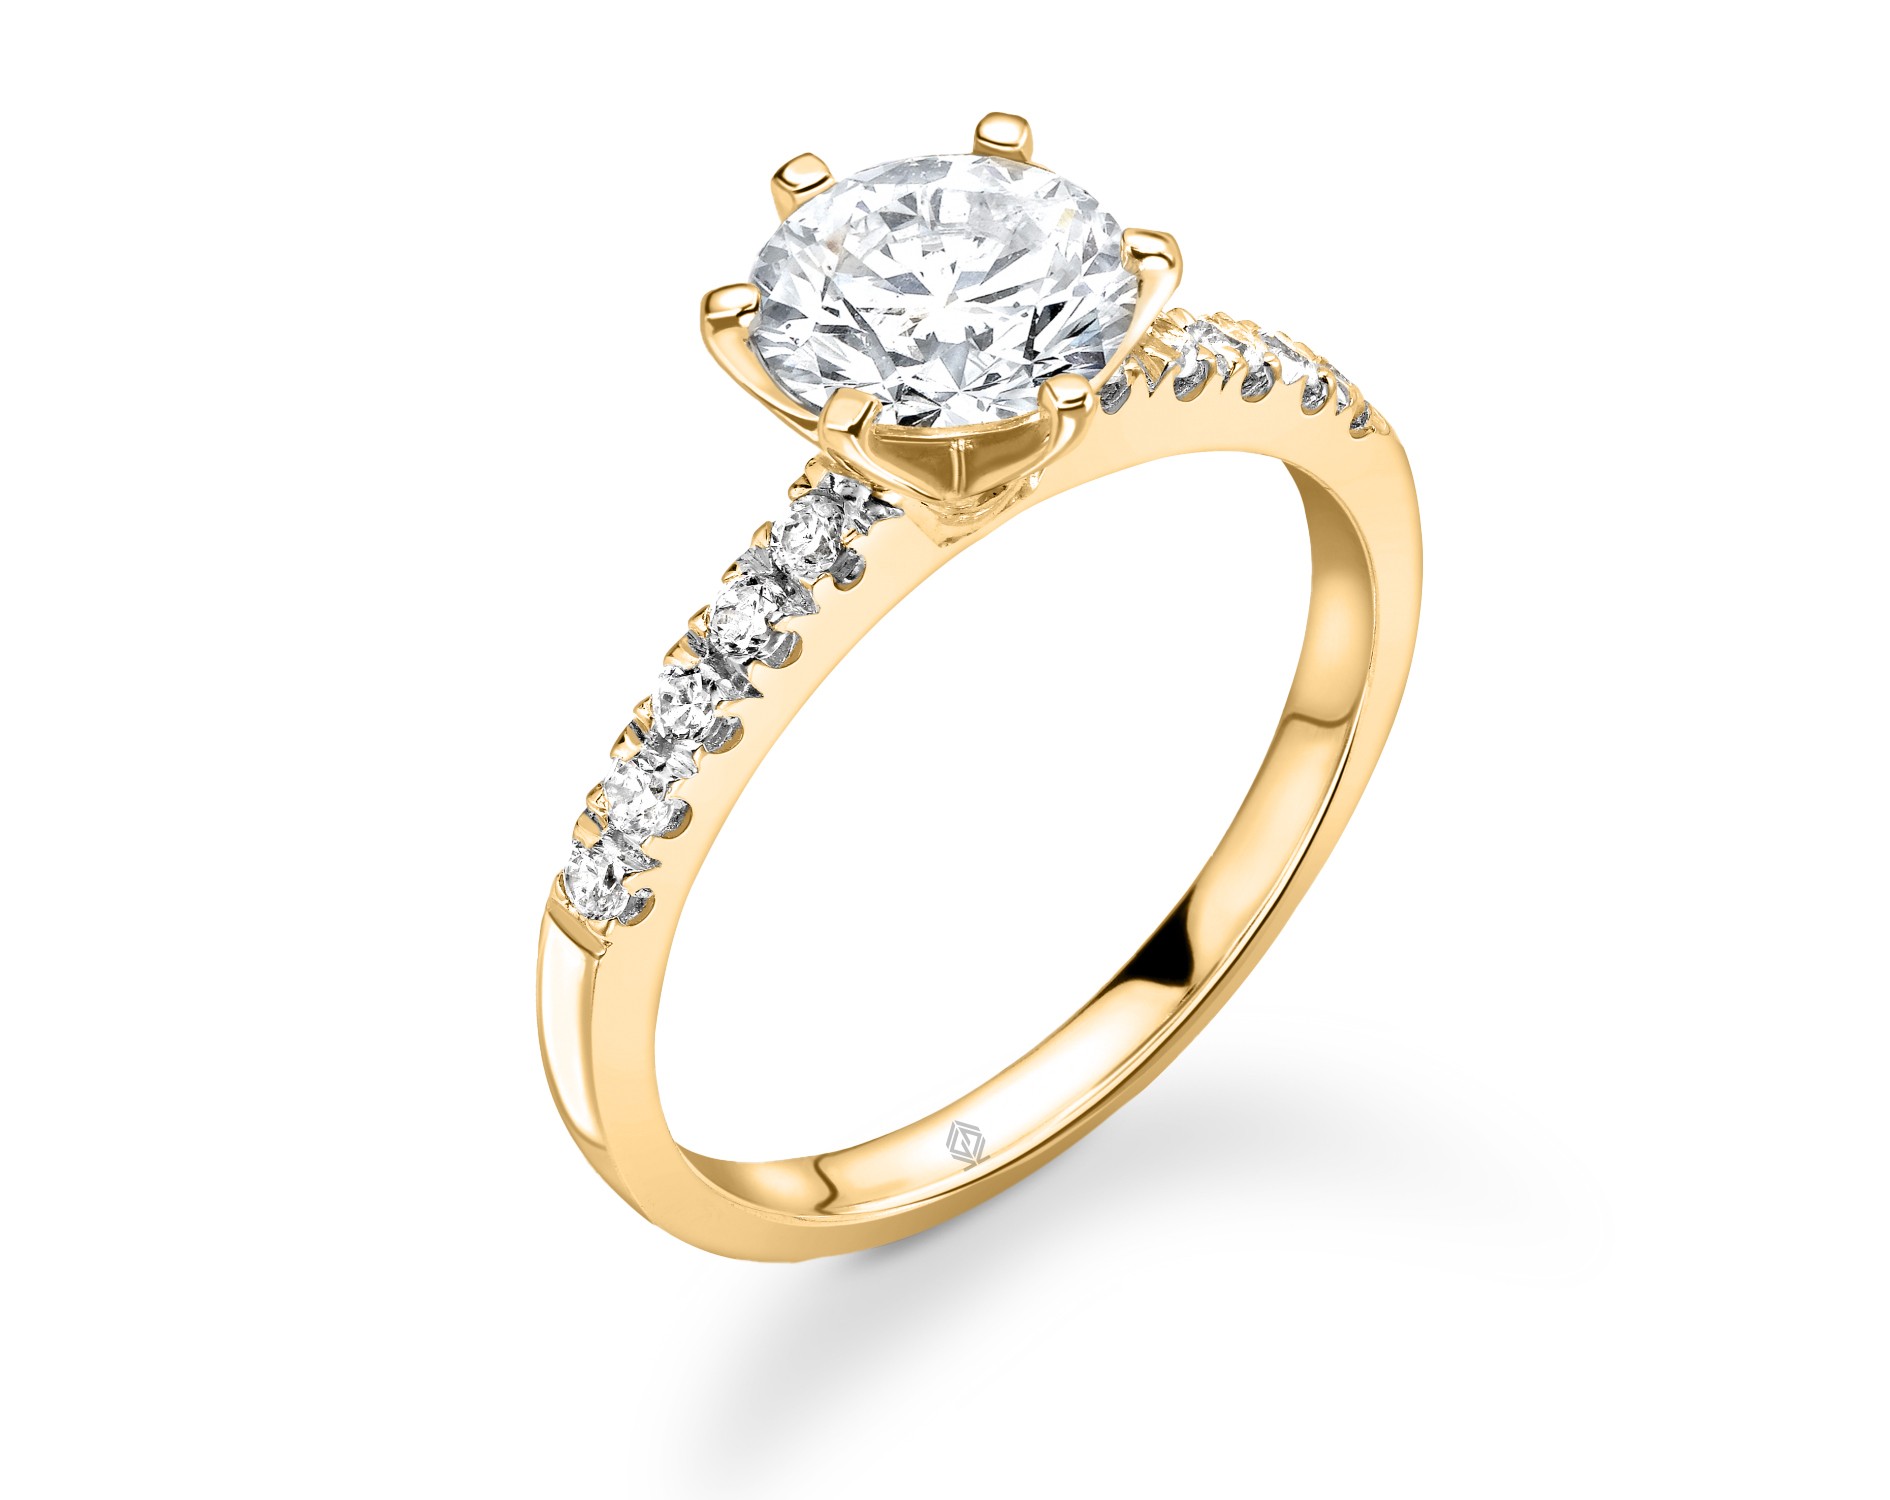 18K YELLOW GOLD ROUND CUT DIAMOND ENGAGEMENT WITH SIDE STONES PAVE SET